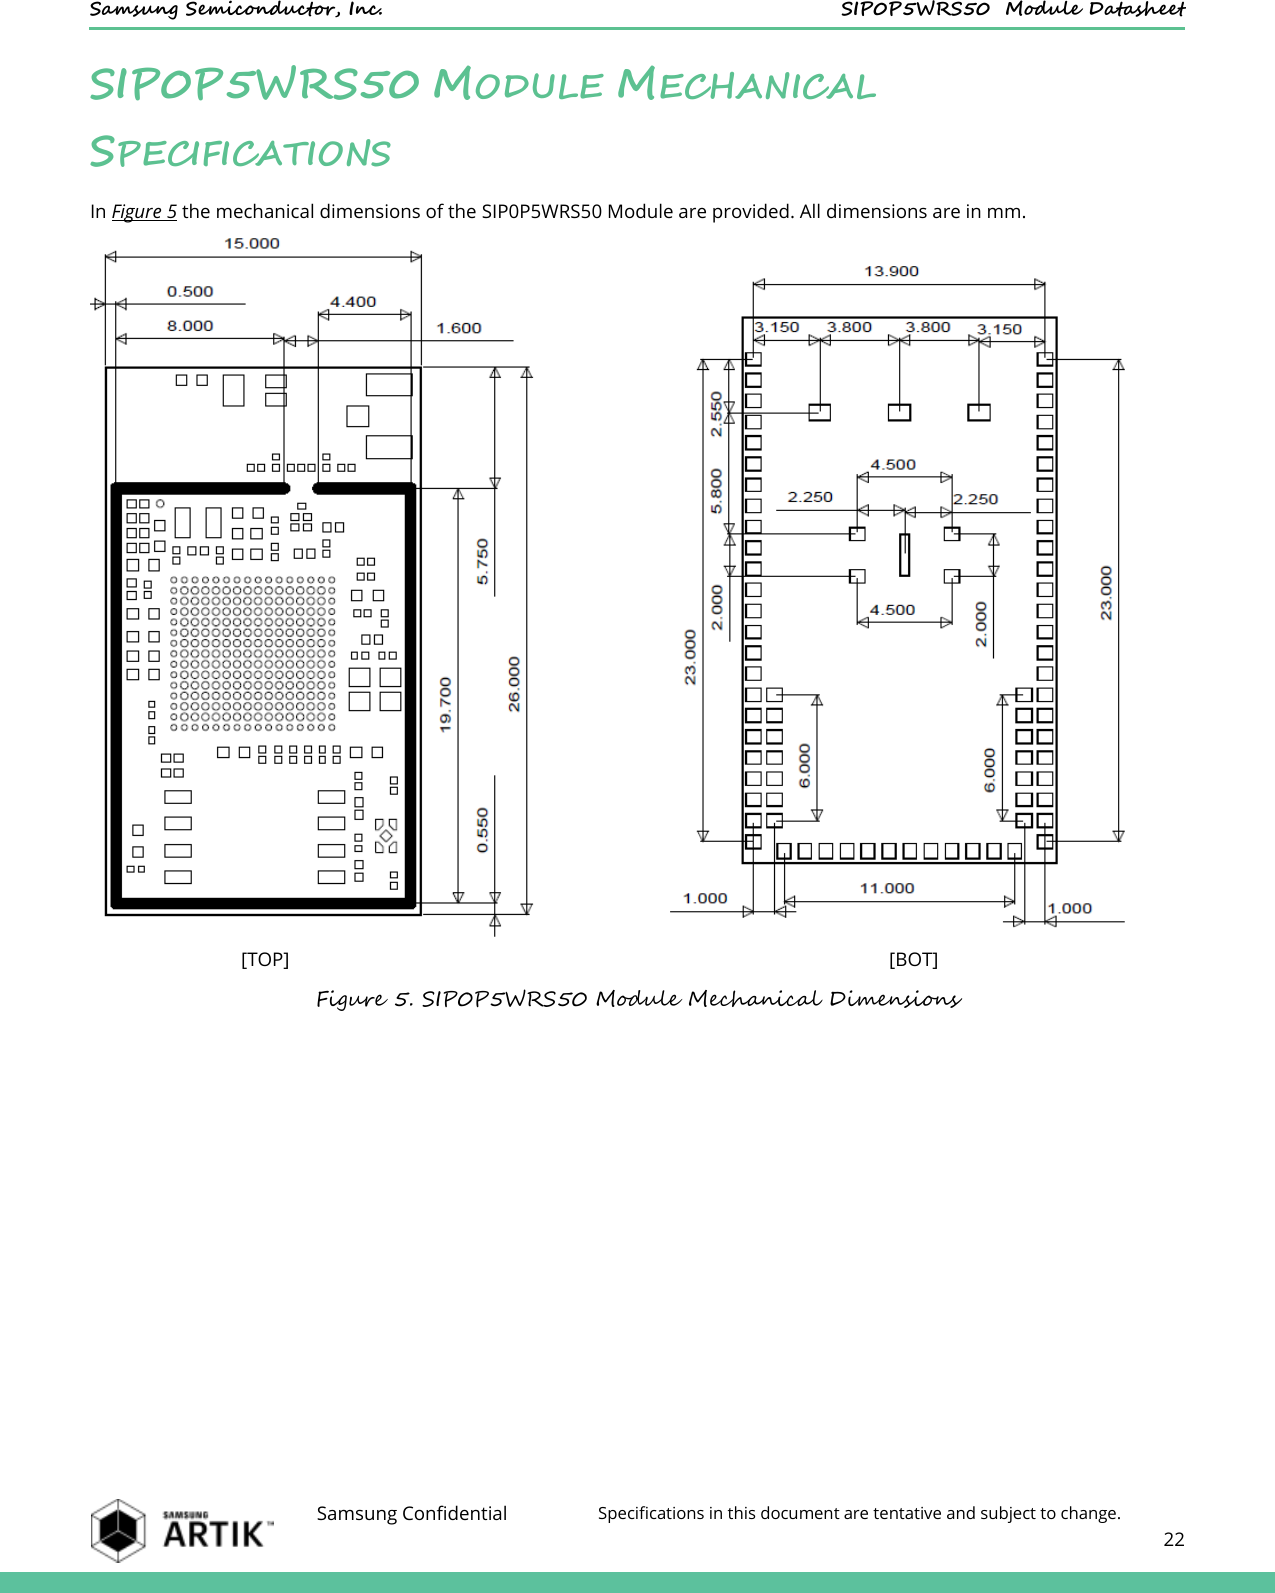    Samsung Semiconductor, Inc.  SIP0P5WRS50  Module Datasheet    Samsung Confidential Specifications in this document are tentative and subject to change.  22  SIP0P5WRS50 MODULE MECHANICAL SPECIFICATIONS In Figure 5 the mechanical dimensions of the SIP0P5WRS50 Module are provided. All dimensions are in mm.                                                             [TOP]                                                                                                                           [BOT] Figure 5. SIP0P5WRS50 Module Mechanical Dimensions   